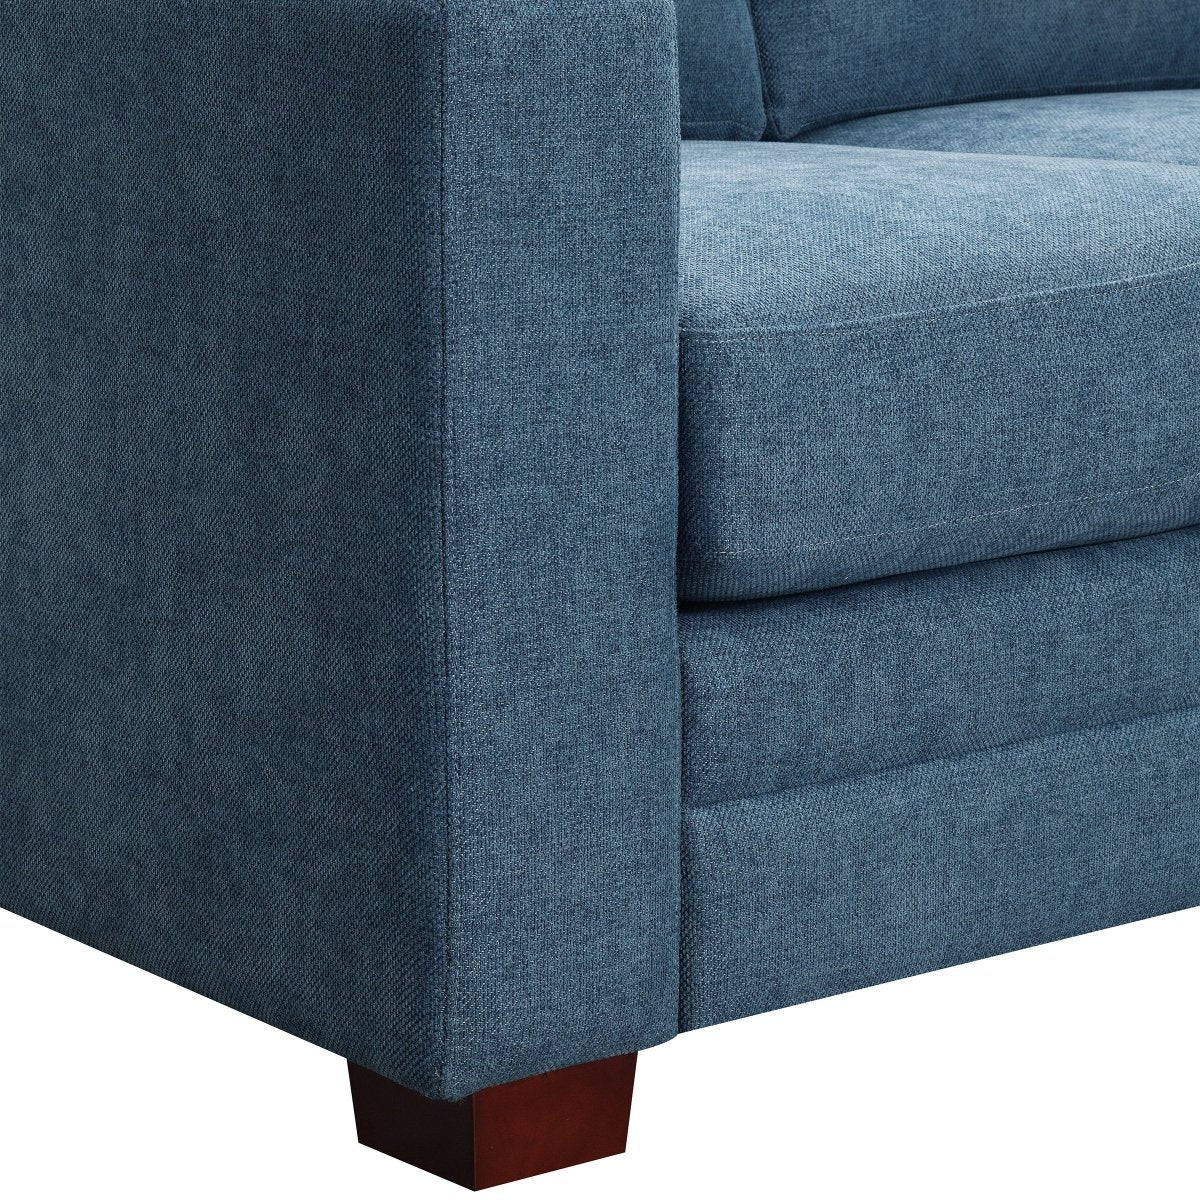 Bretton Fabric Sofa with Reversible Chaise - Alpine Outlets